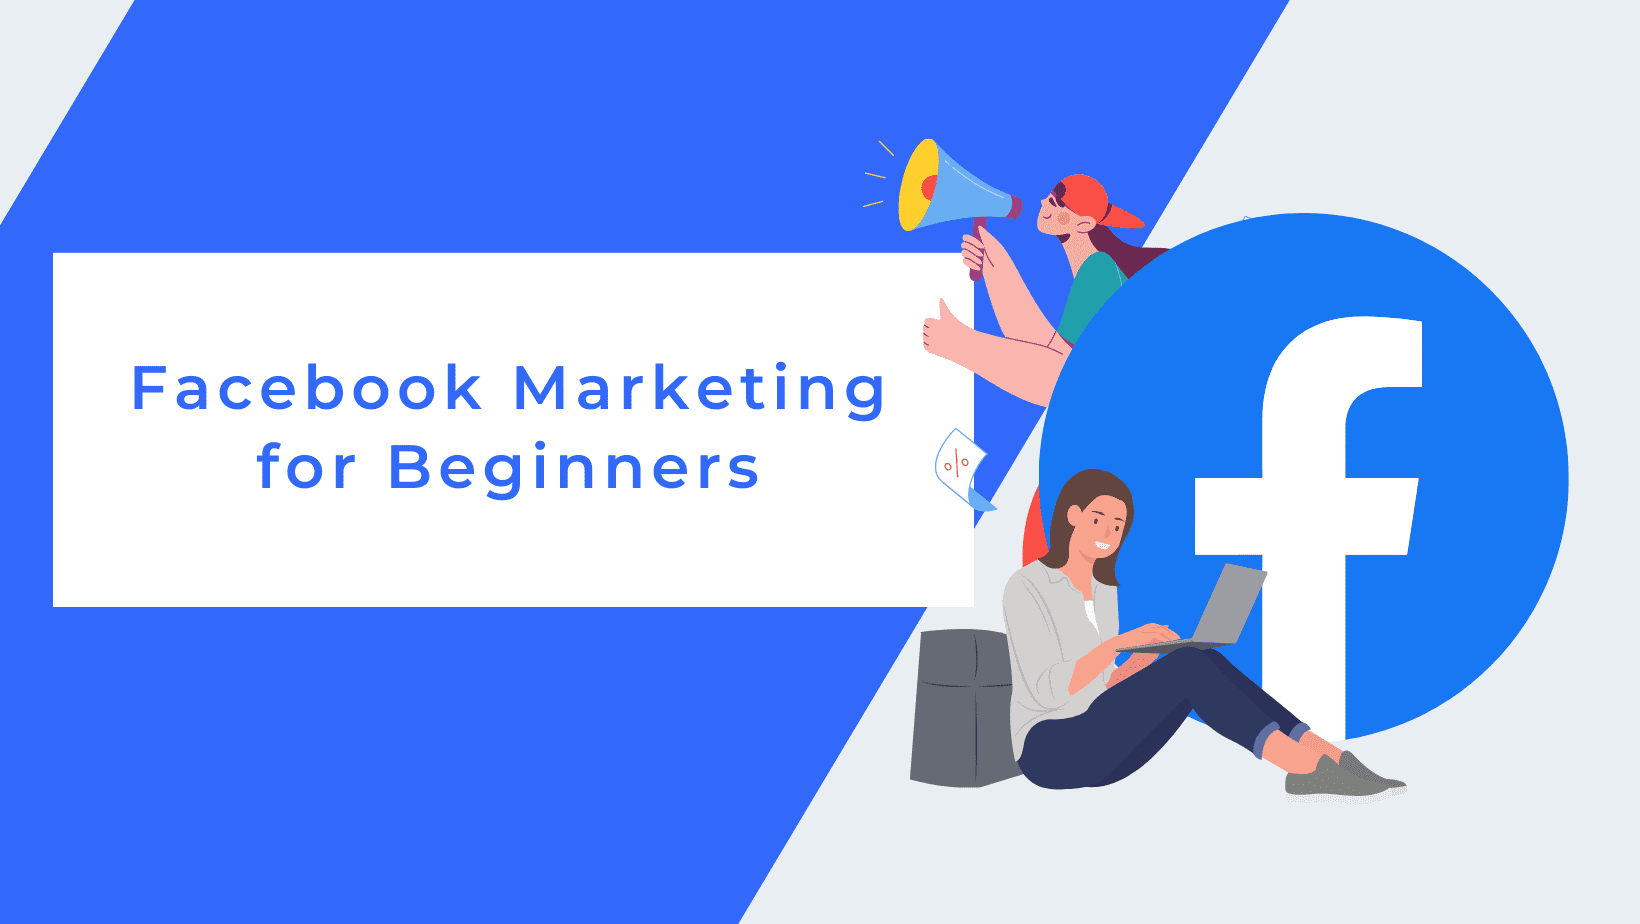 Facebook marketing for beginners featured image with people doing marketing